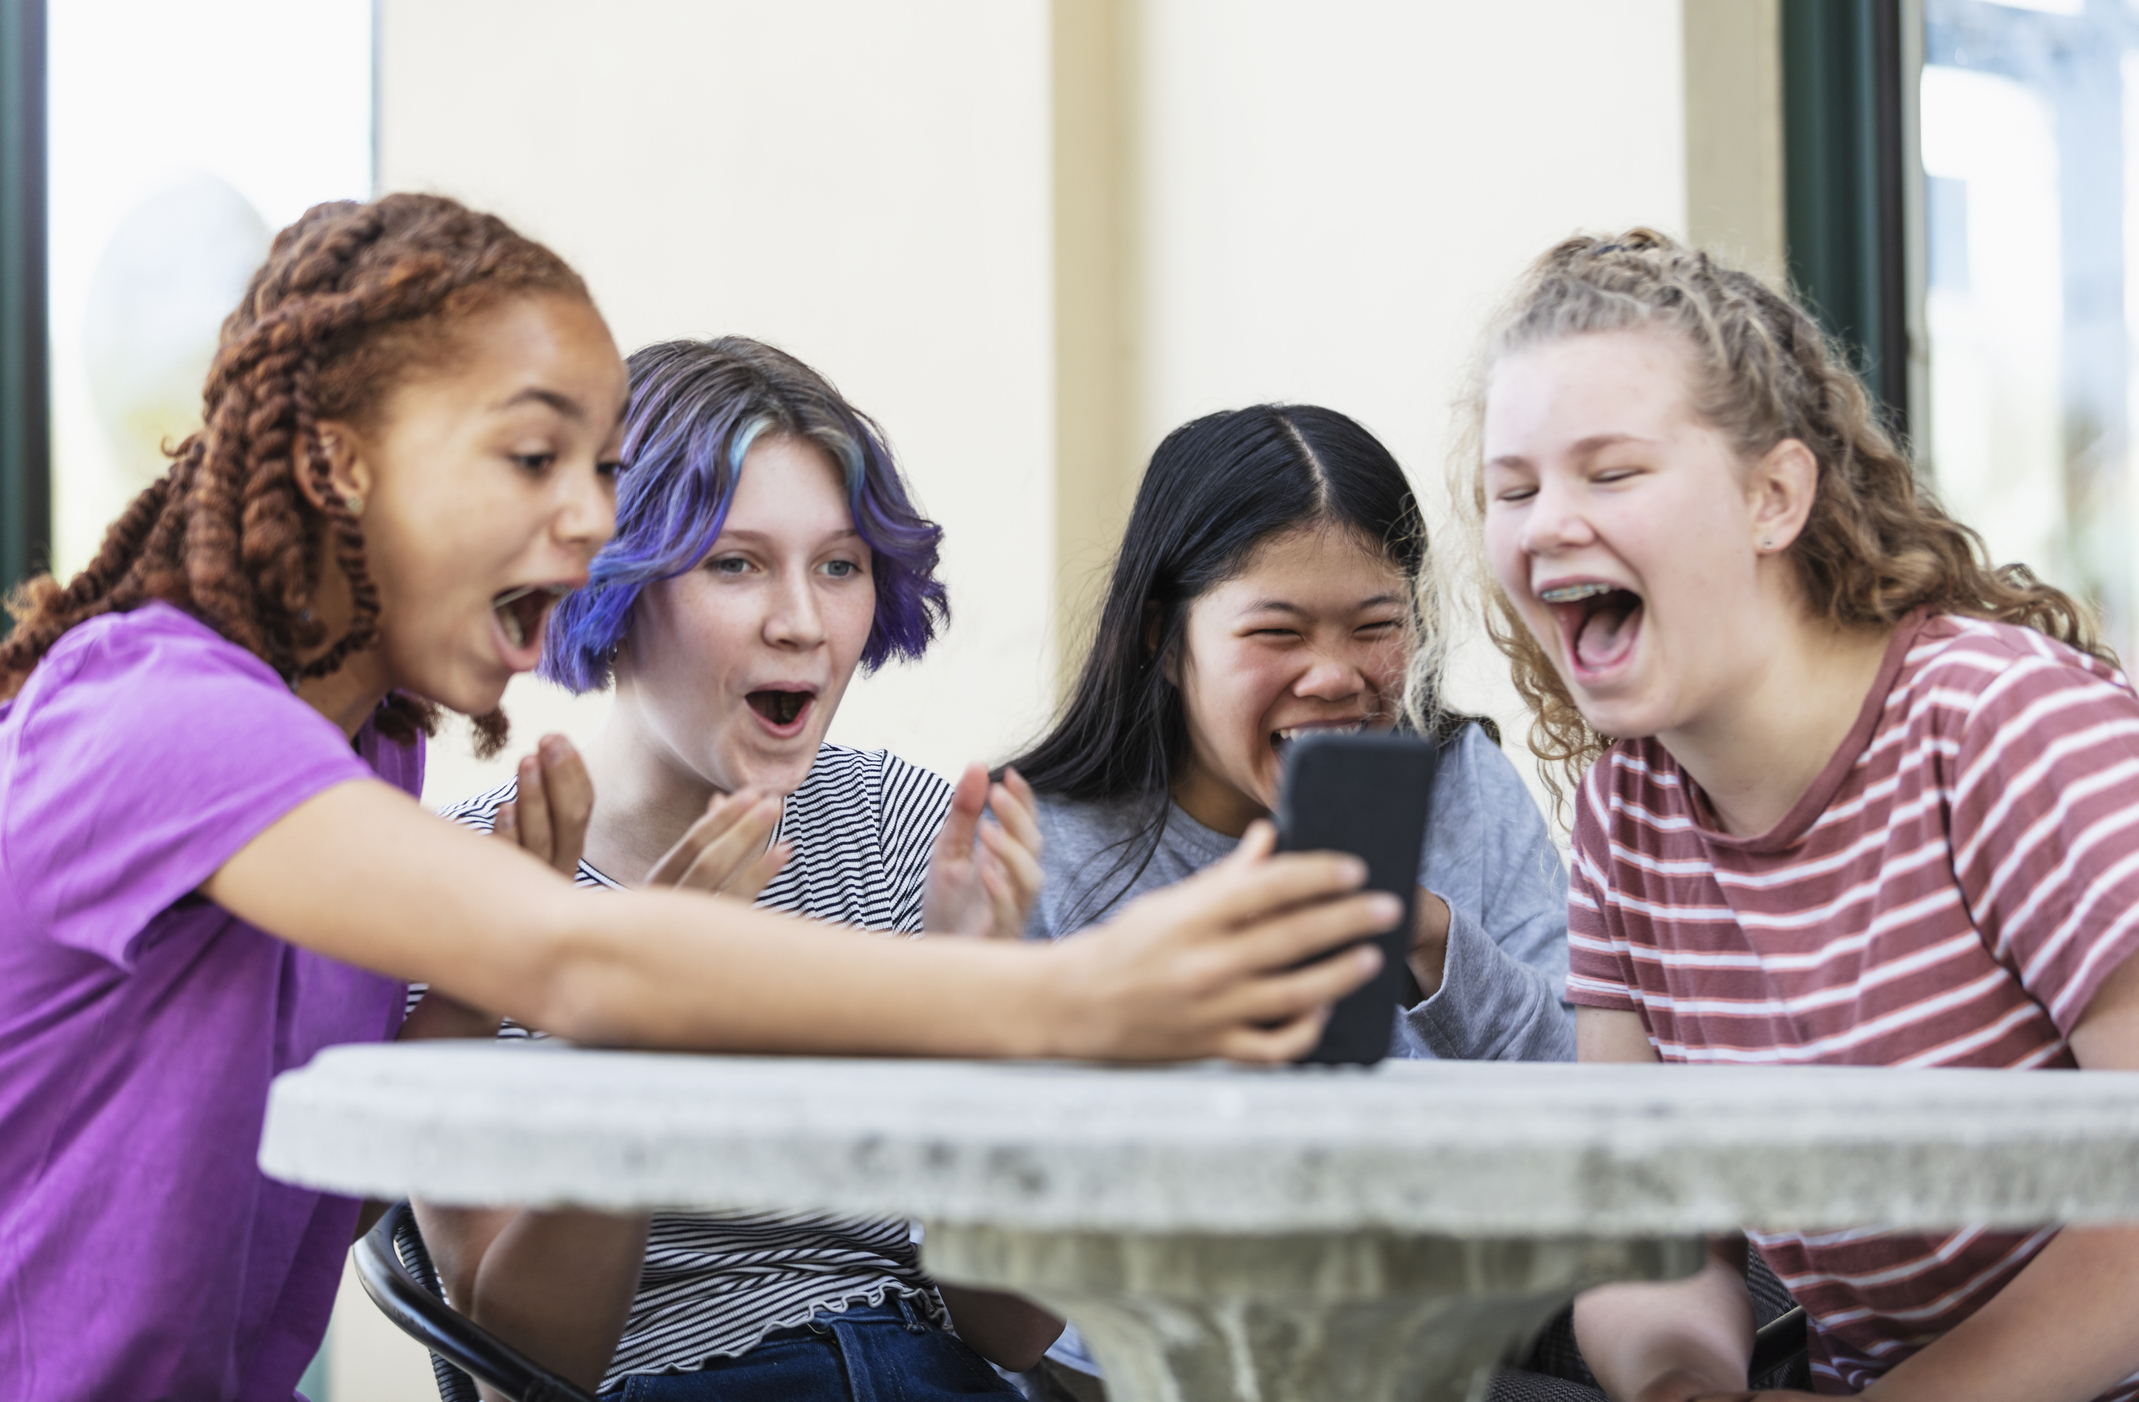 Teens laughing together at a table while looking at a phone